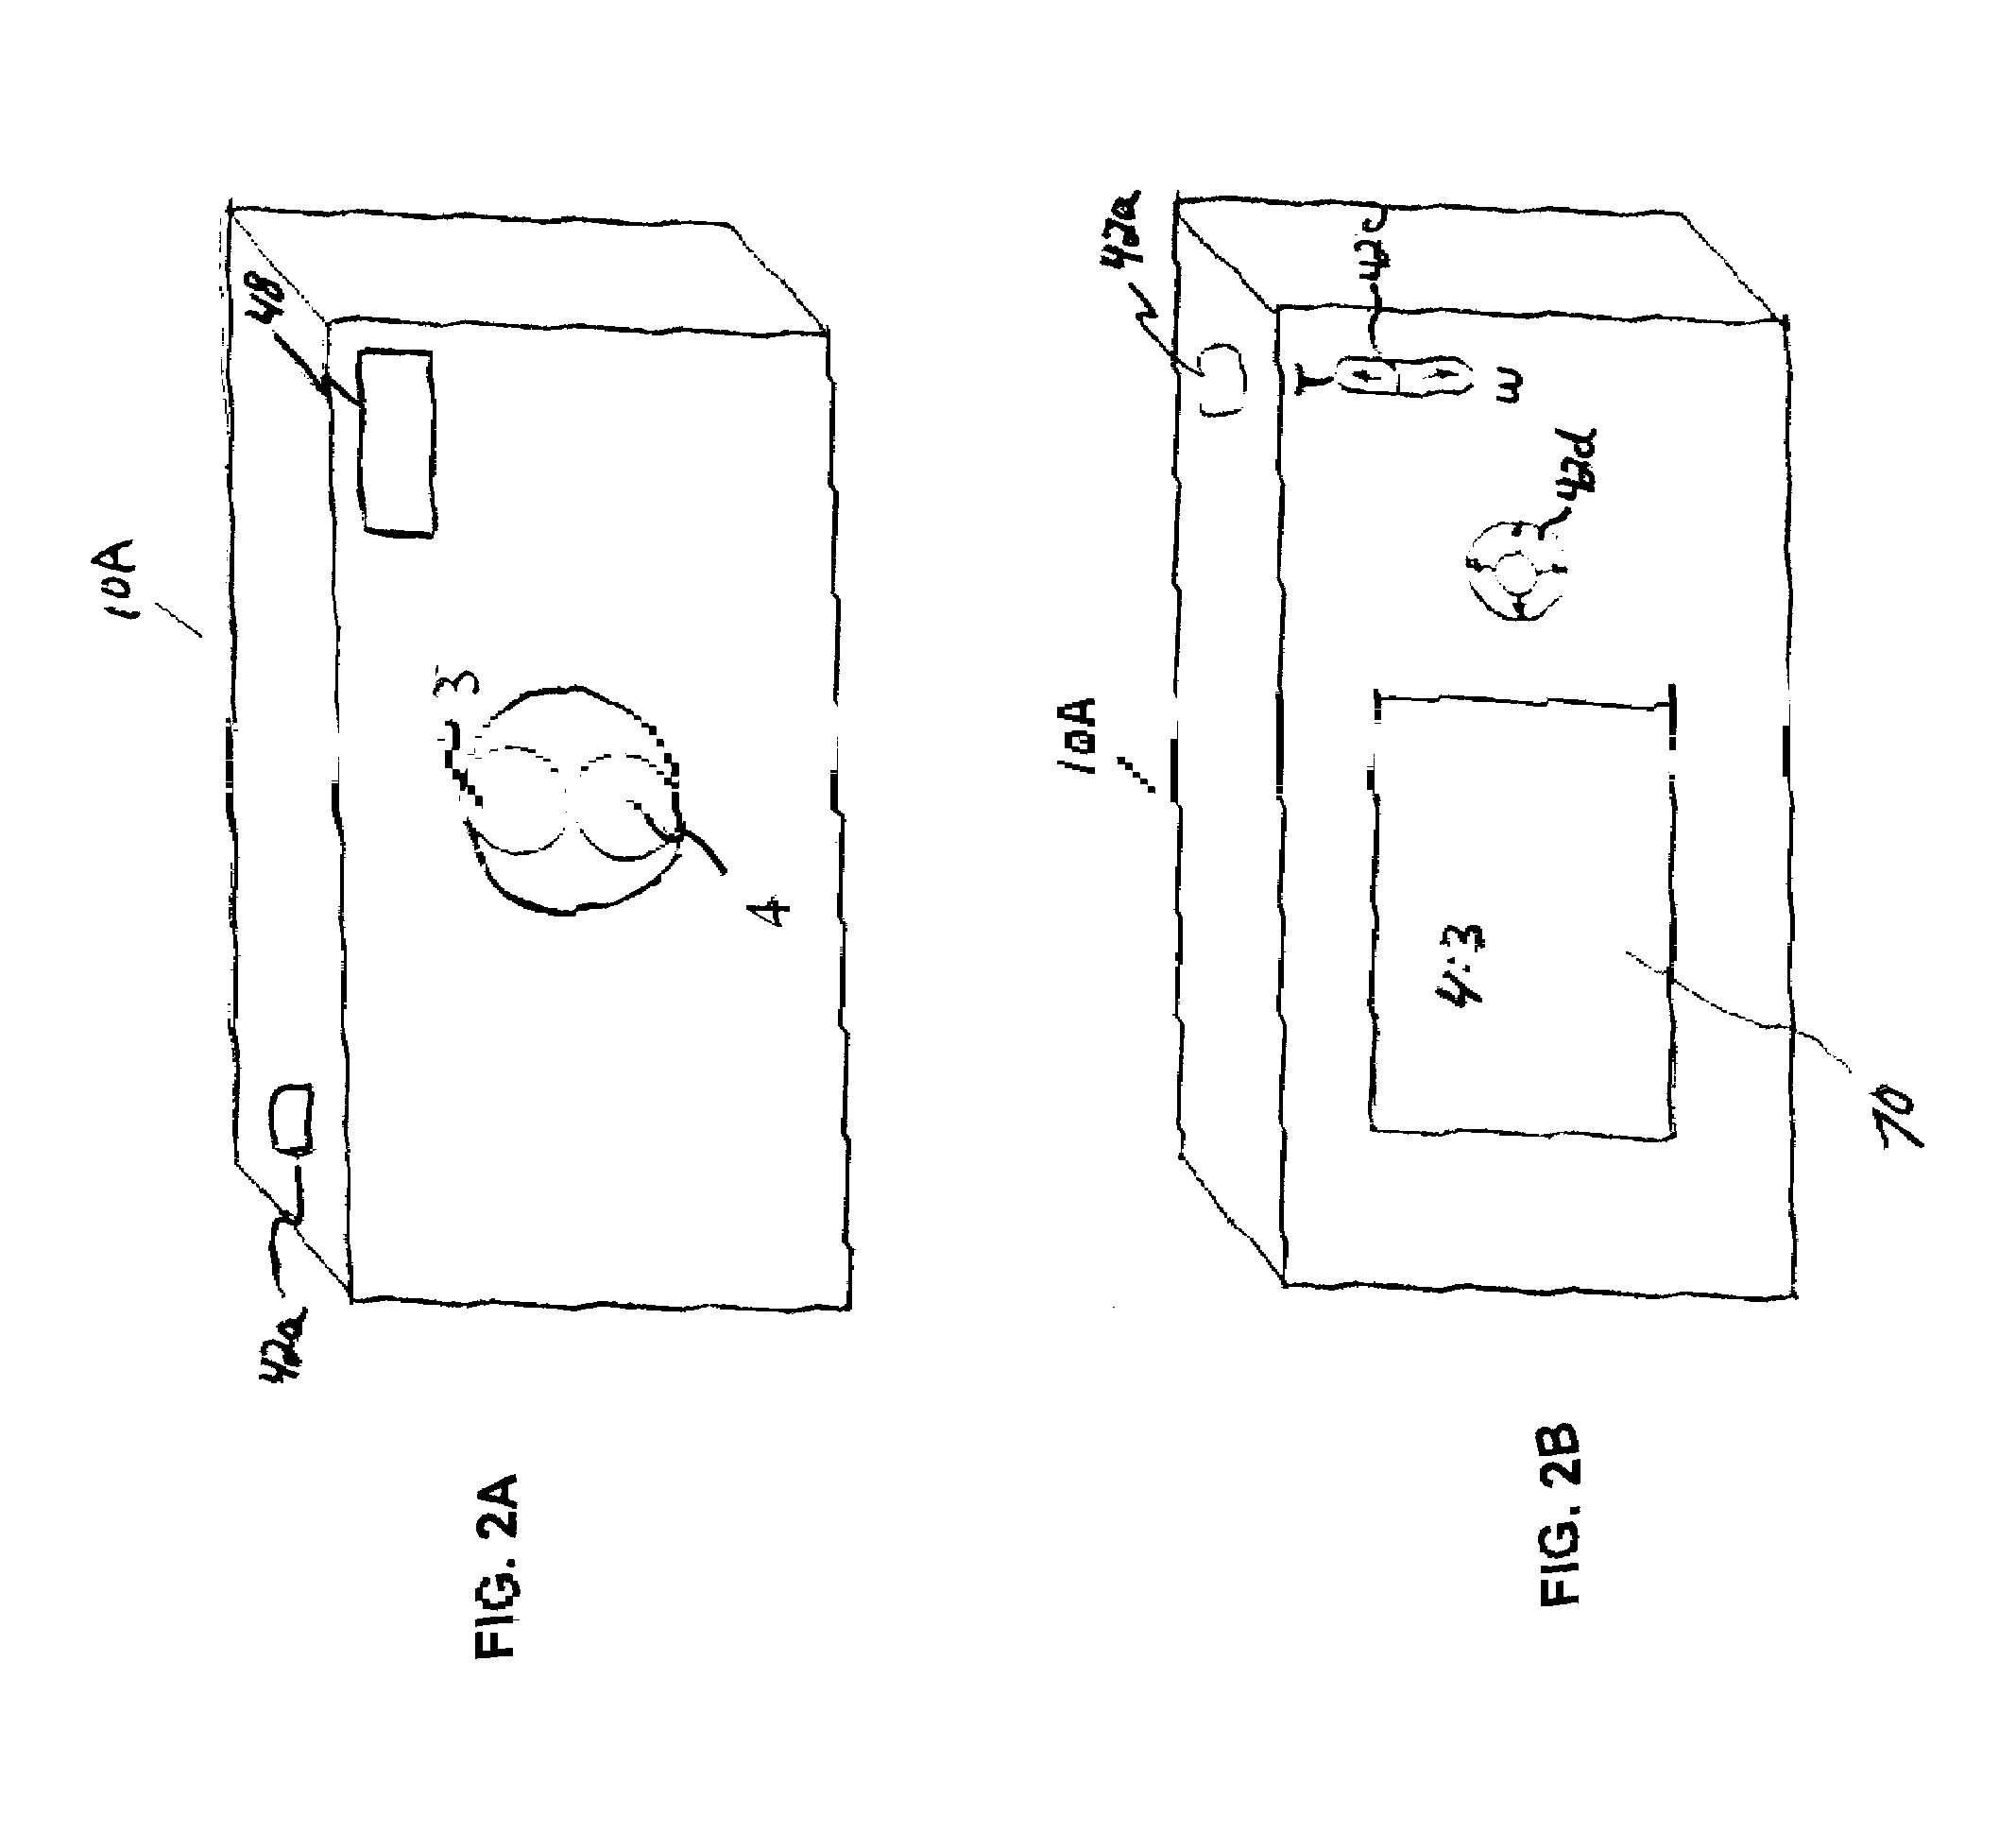 Camera using multiple lenses and image sensors operable in a default imaging mode